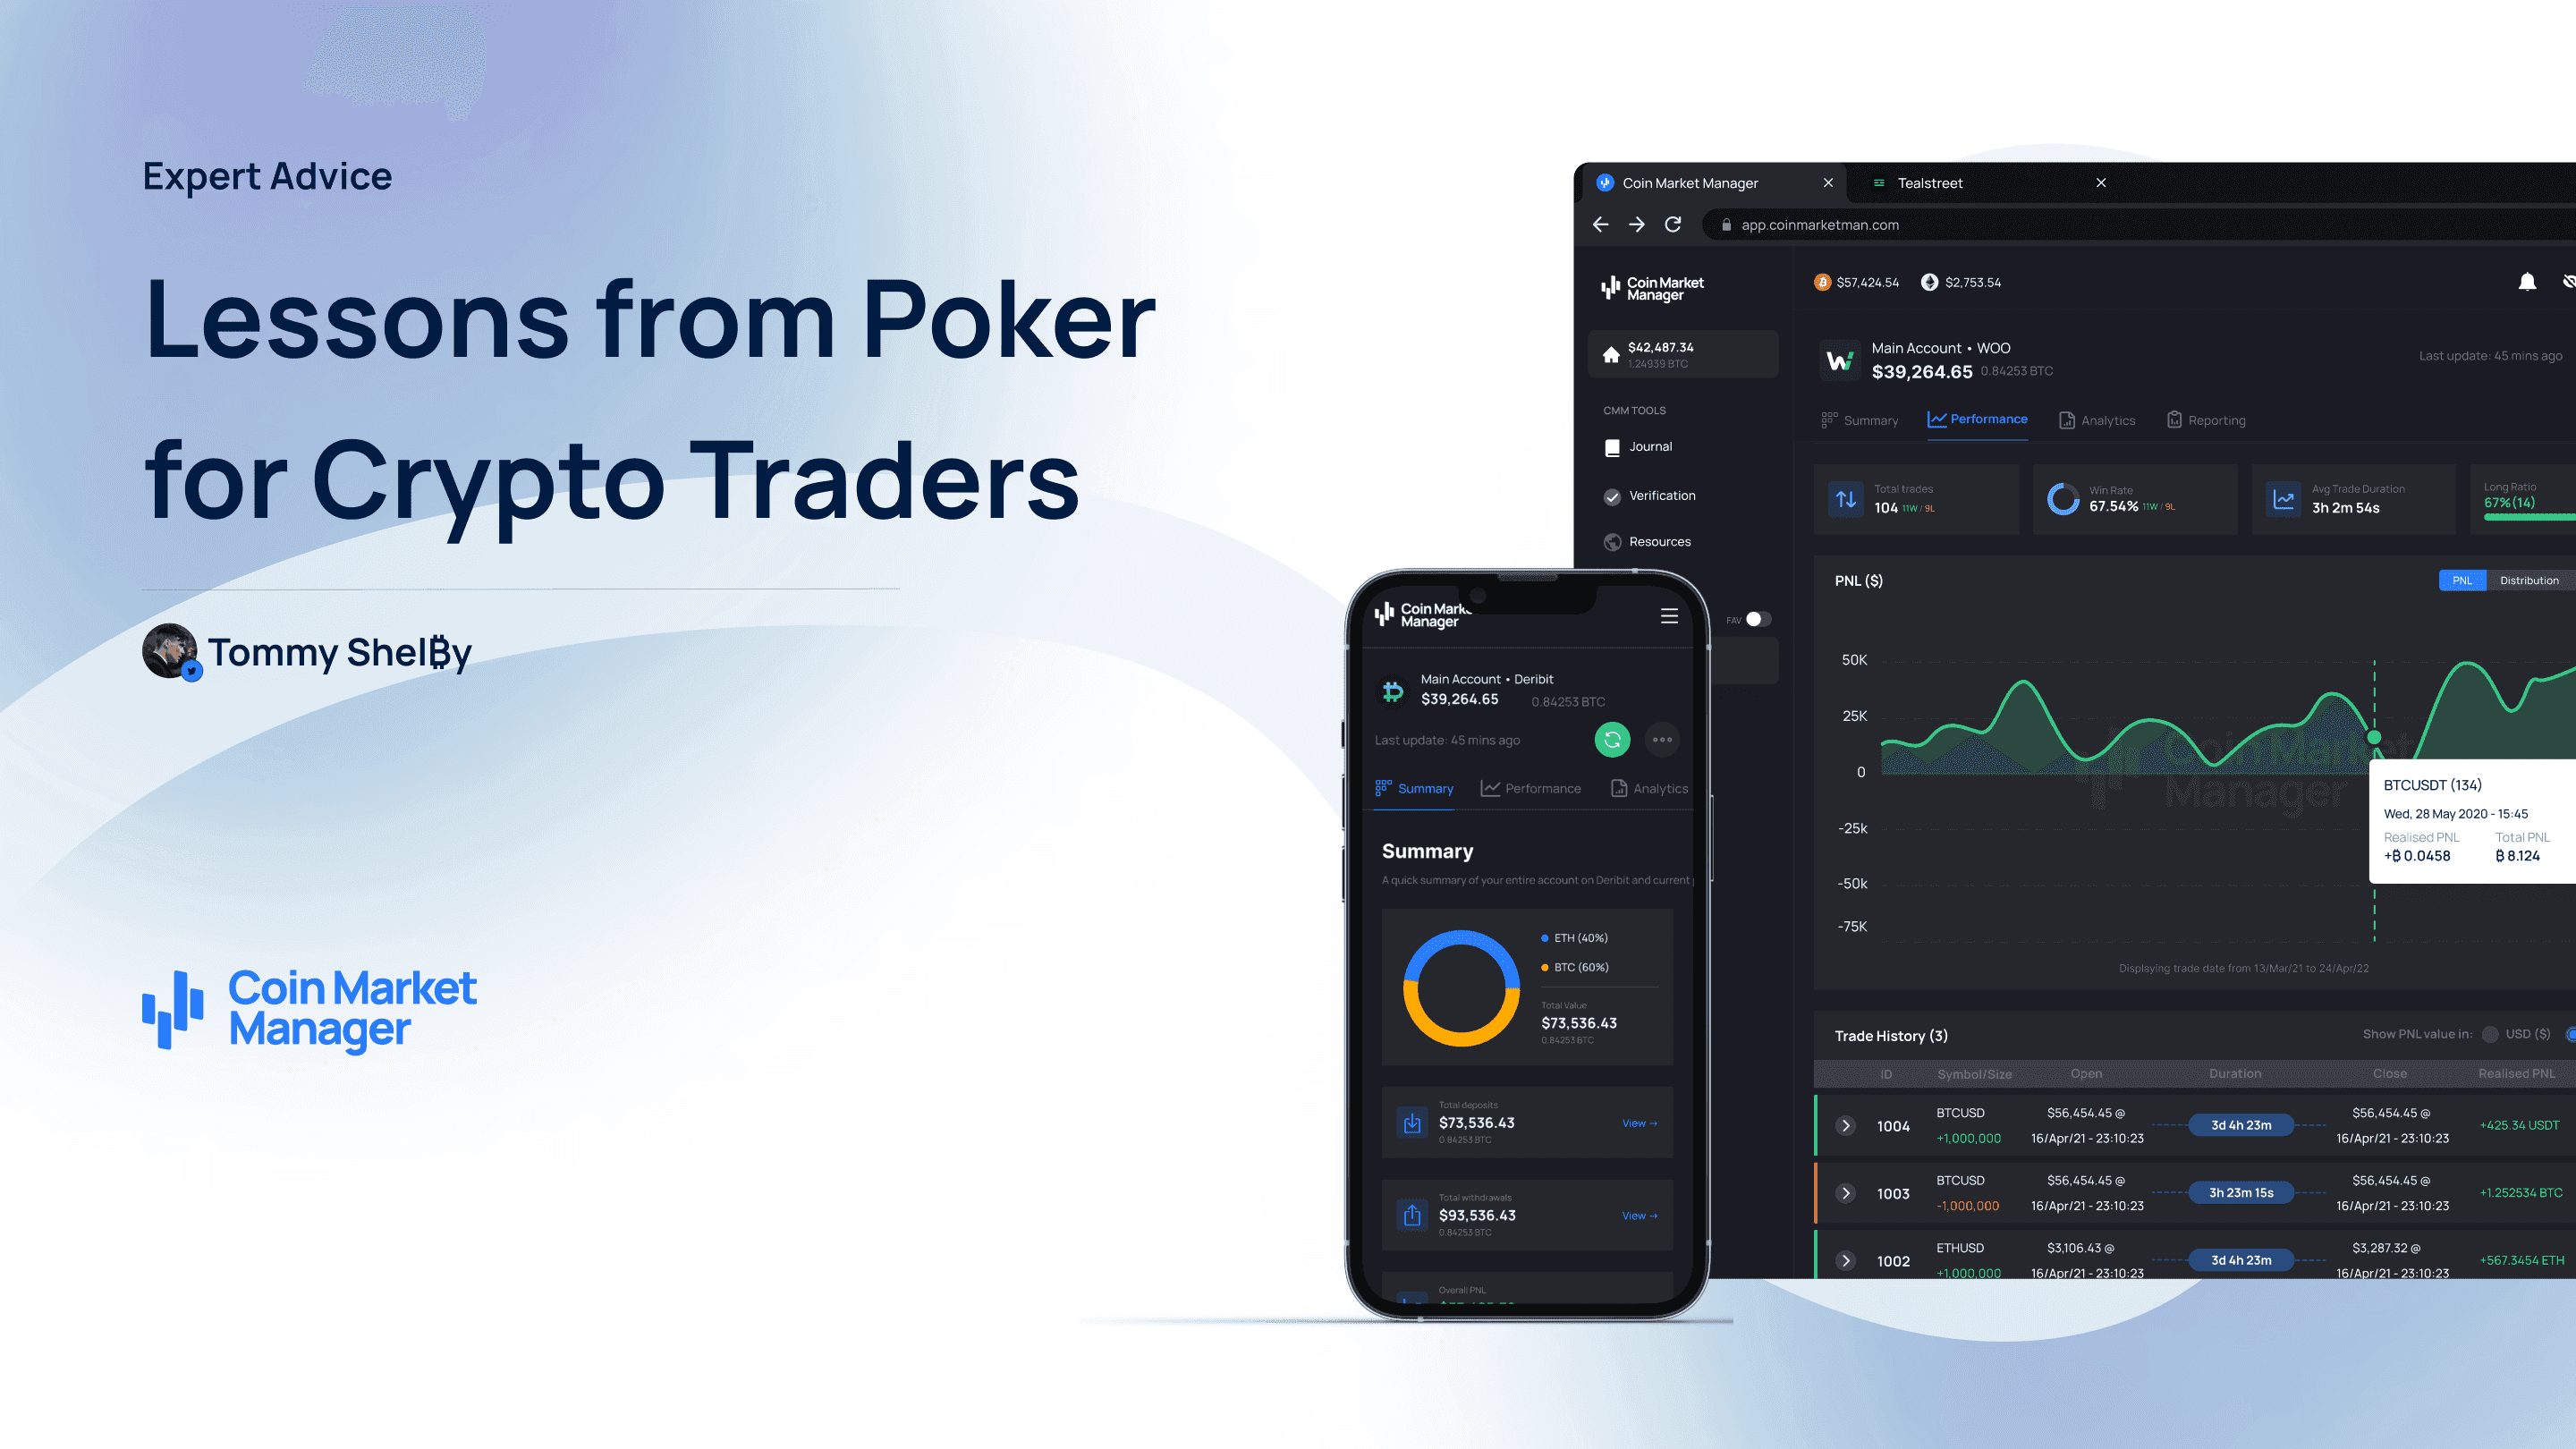 Lessons from Poker for Crypto Traders